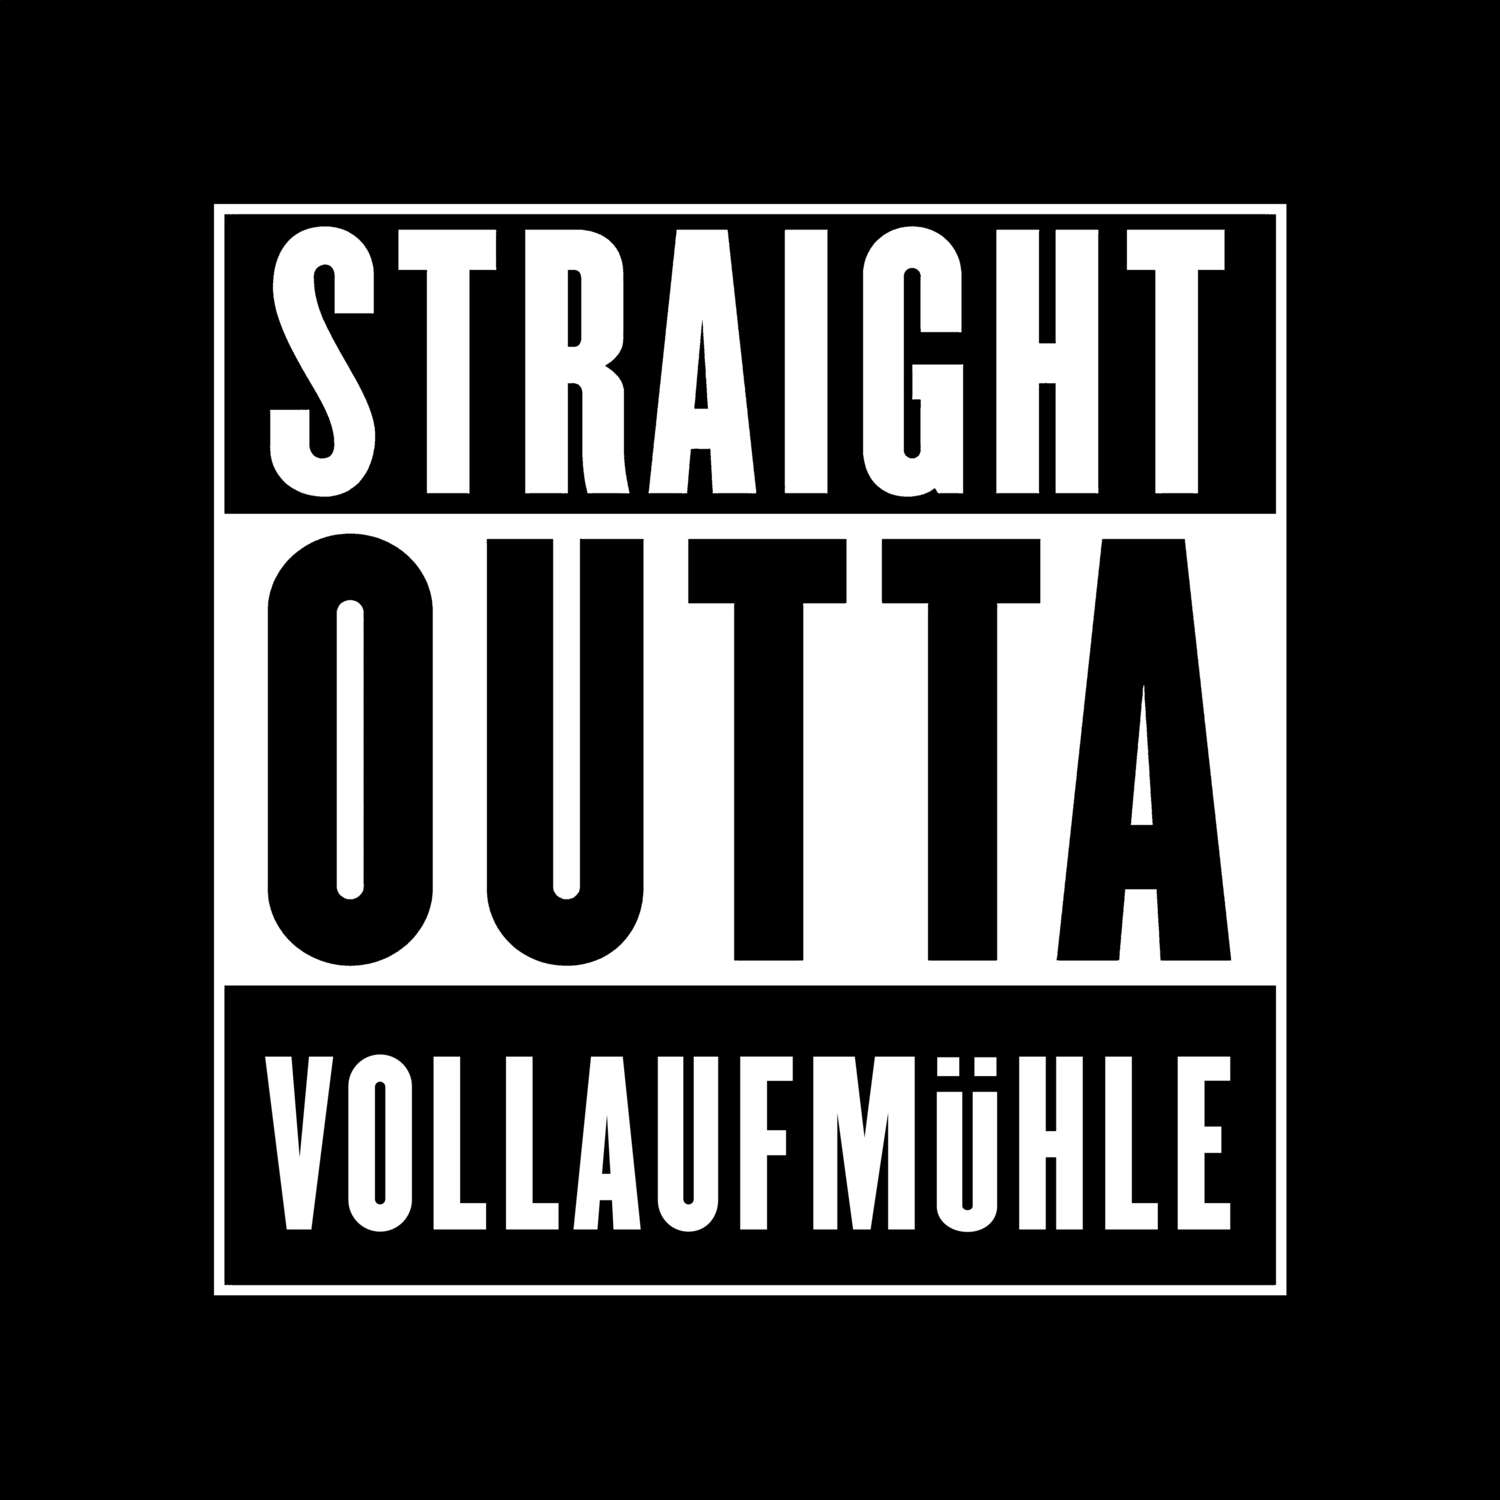 Vollaufmühle T-Shirt »Straight Outta«